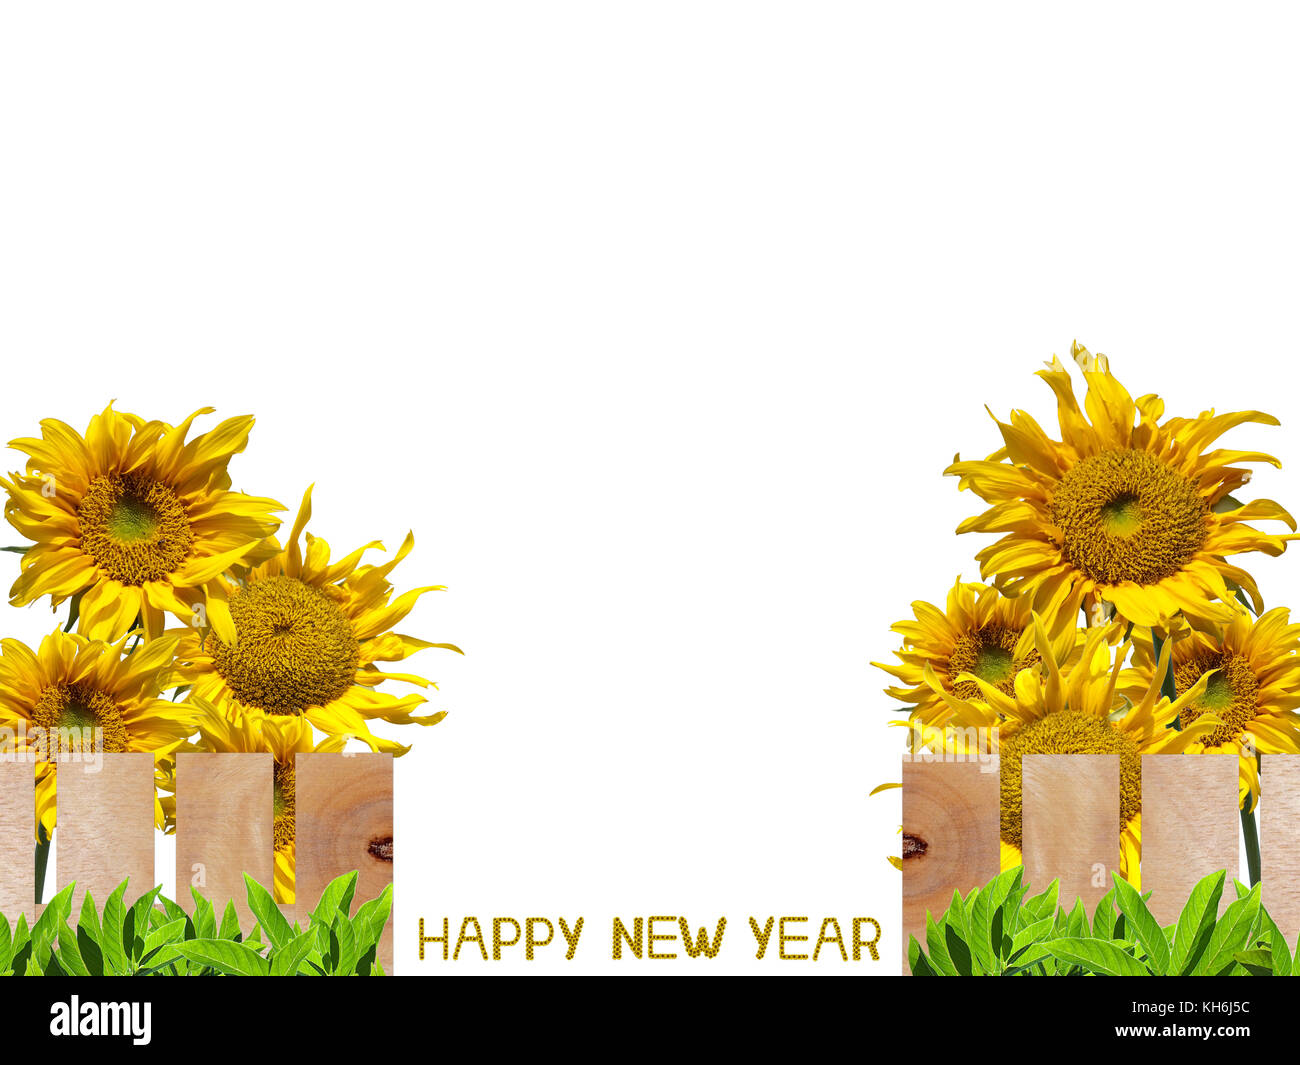 Beautiful garden fence with sunflower letter arrange in the words Happy New Year, clipping path included. Stock Photo